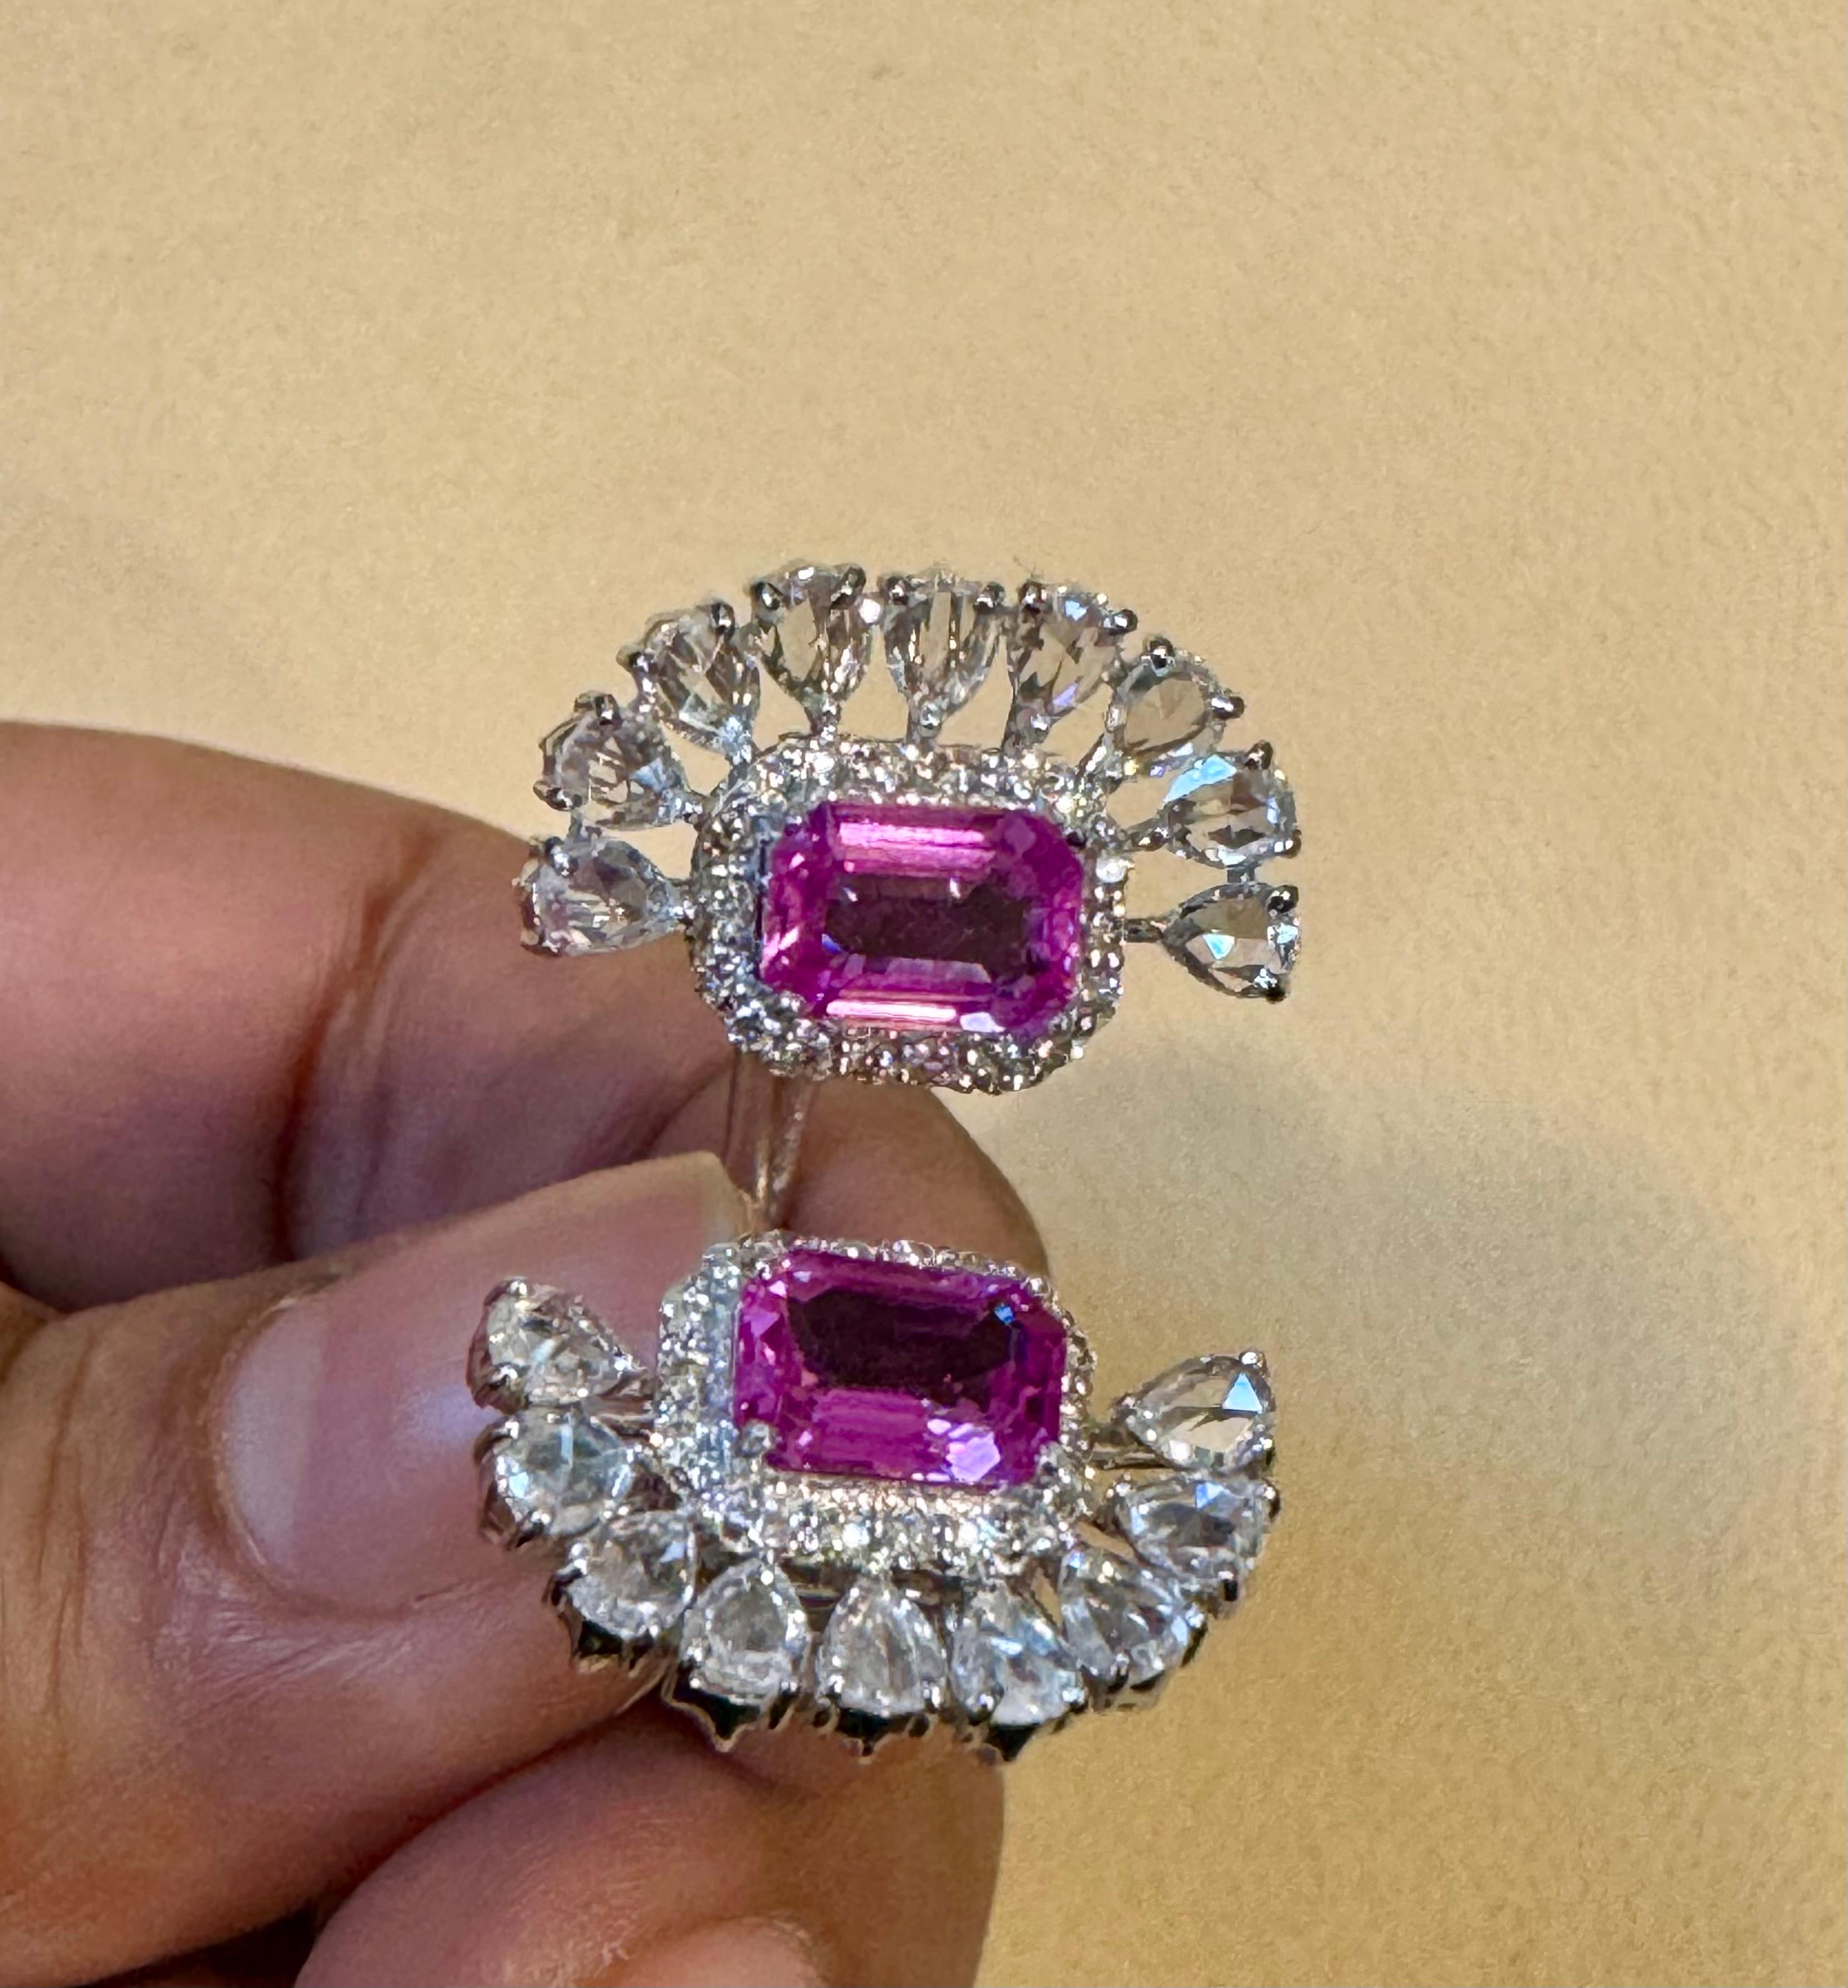 2.5 Ct Pink Emerald Cut Pink  Sapphire & 2.8 Ct Diamond 18 Kt White Gold Ring S6 In Excellent Condition For Sale In New York, NY